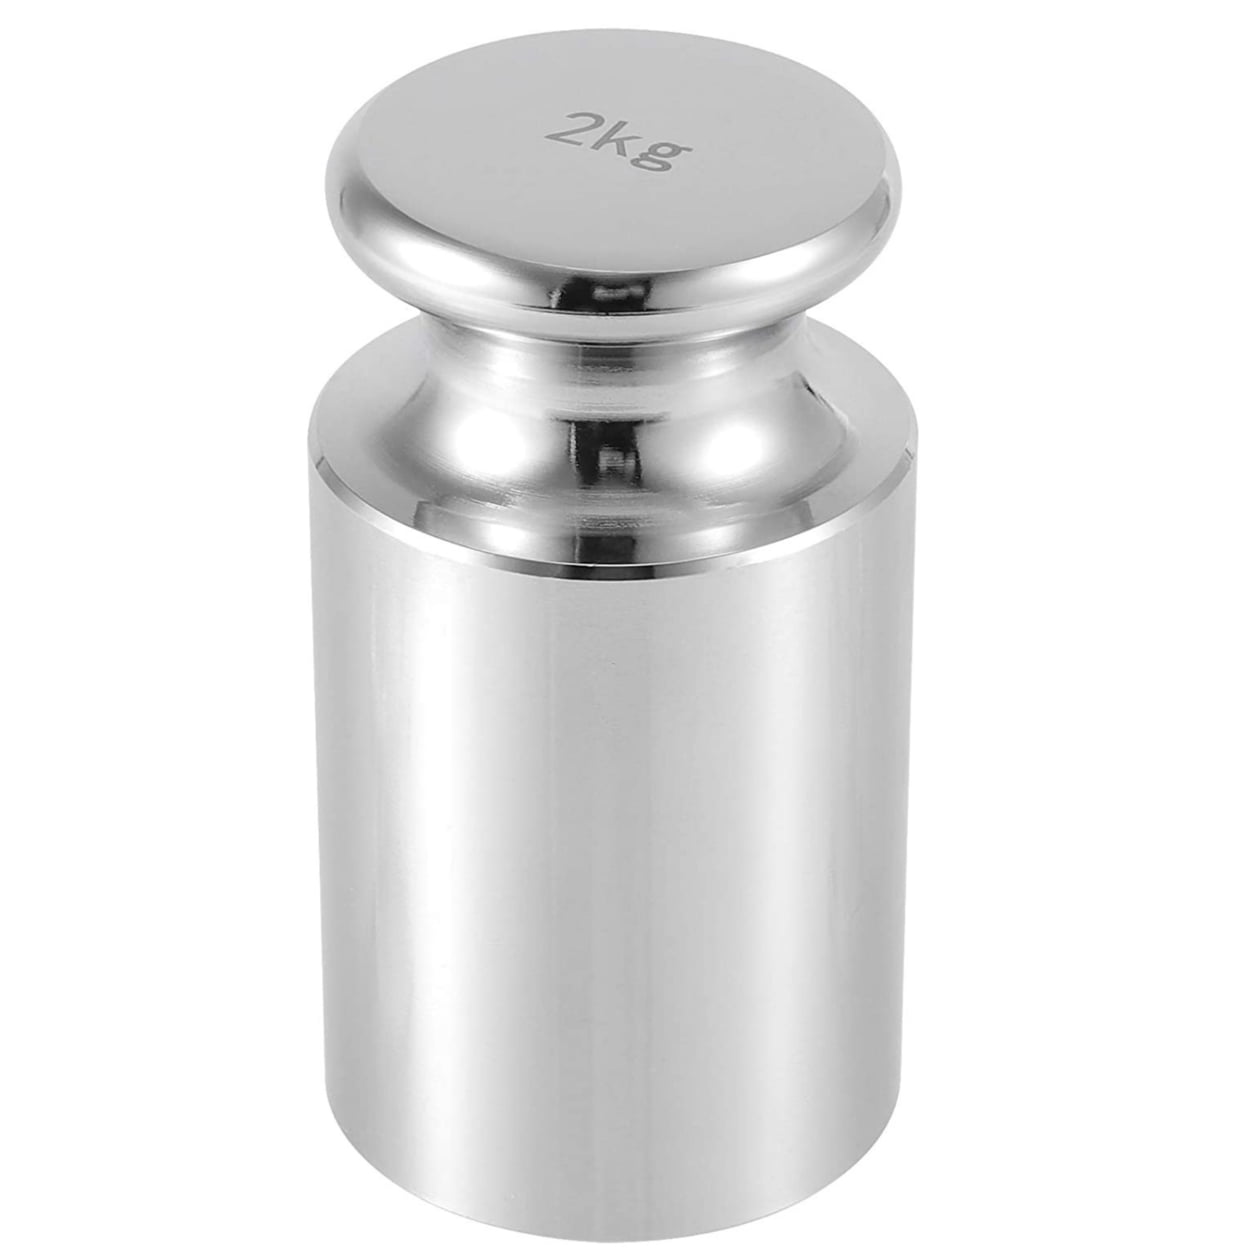 100g CALIBRATION WEIGHT FOR DIGITAL SCALES 50gr CALIBRATING WEIGHT 500 gram 